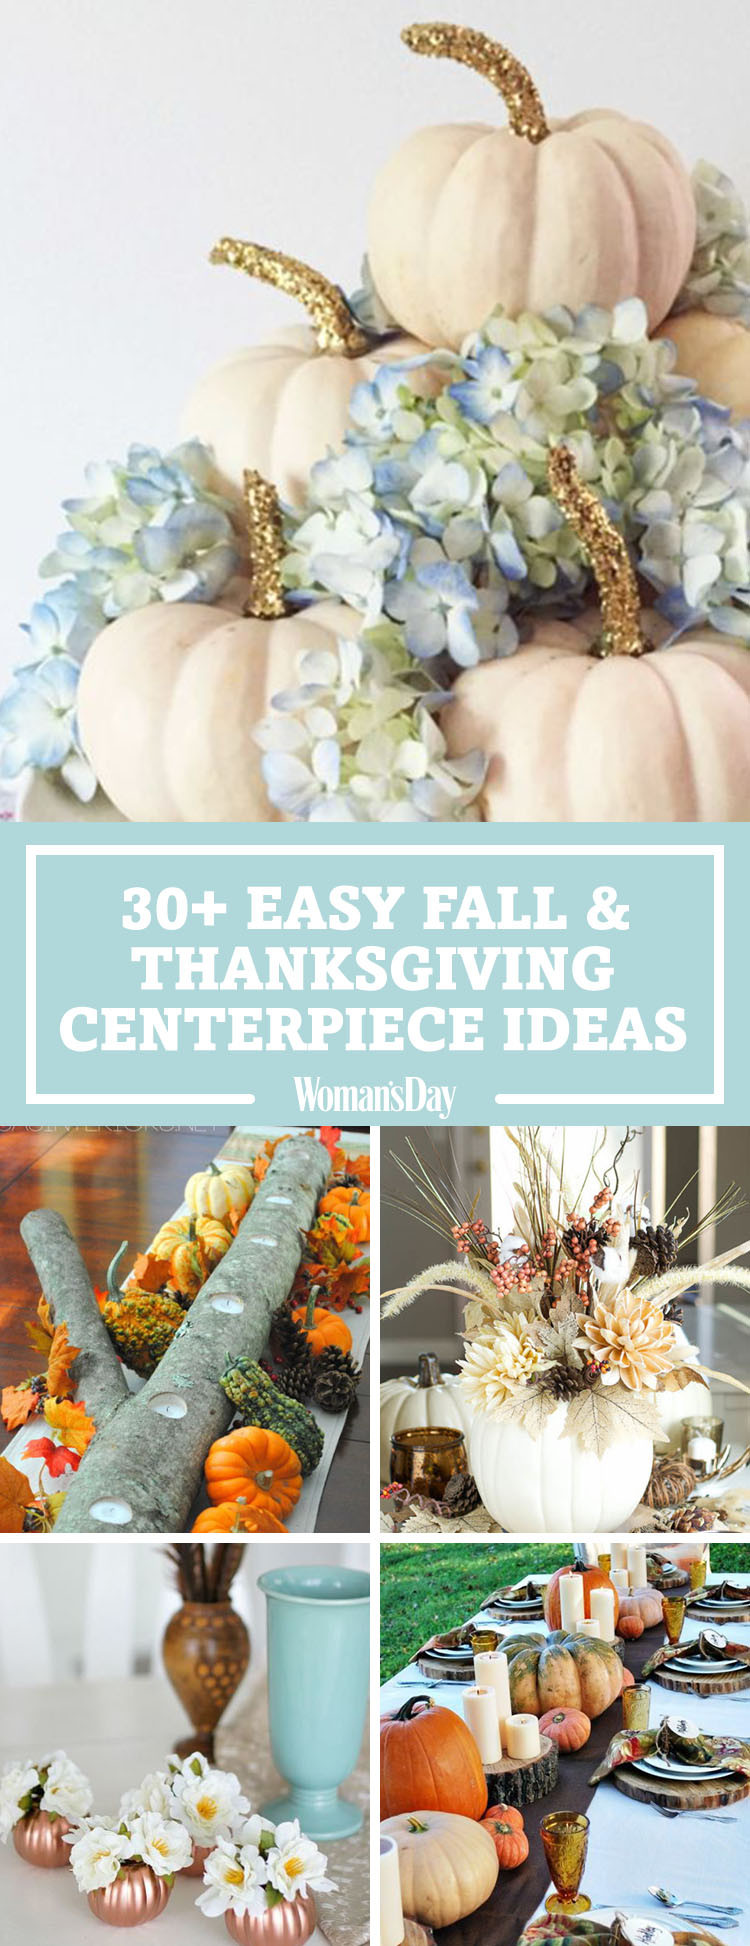 Easy Thanksgiving Table Decorations
 40 Fall and Thanksgiving Centerpieces DIY Ideas for Fall